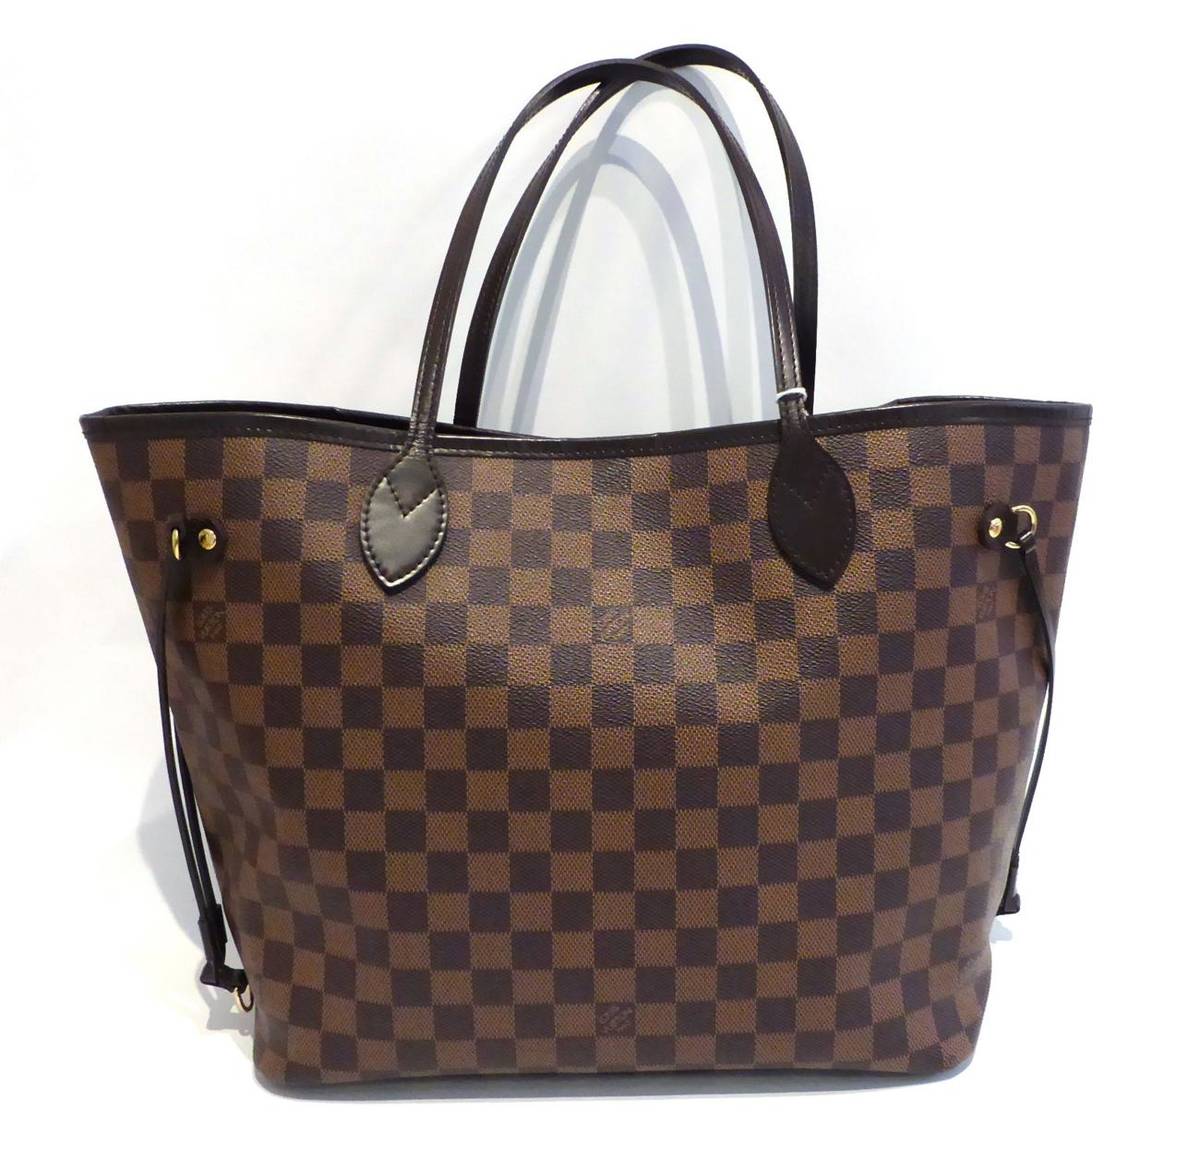 Lot 2125 - Louis Vuitton Damier Ebene 'Never Full' Edition Tote Bag, 33cm by 28cm by 17cm, with dust bag